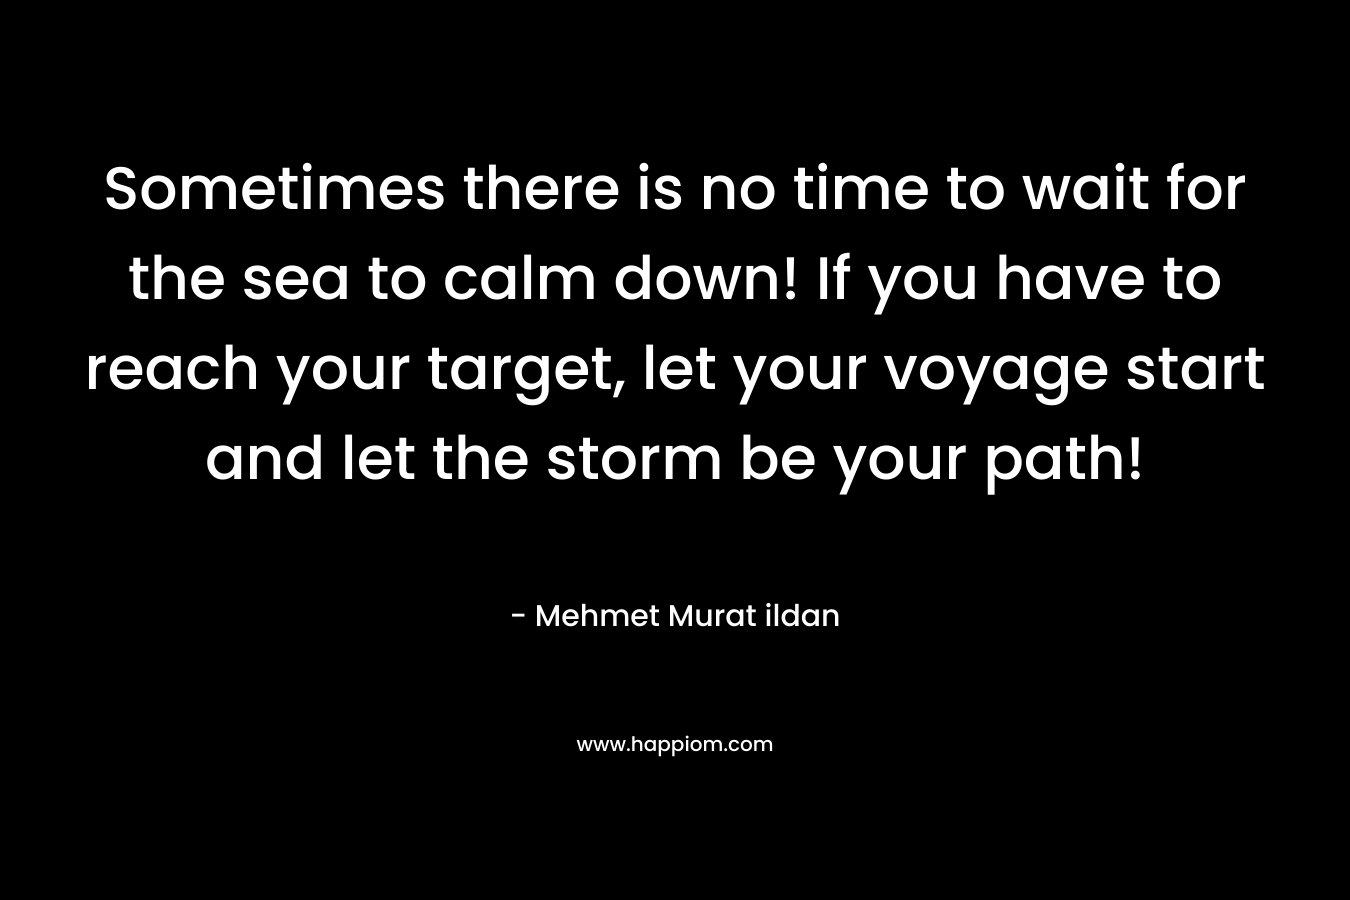 Sometimes there is no time to wait for the sea to calm down! If you have to reach your target, let your voyage start and let the storm be your path! – Mehmet Murat ildan